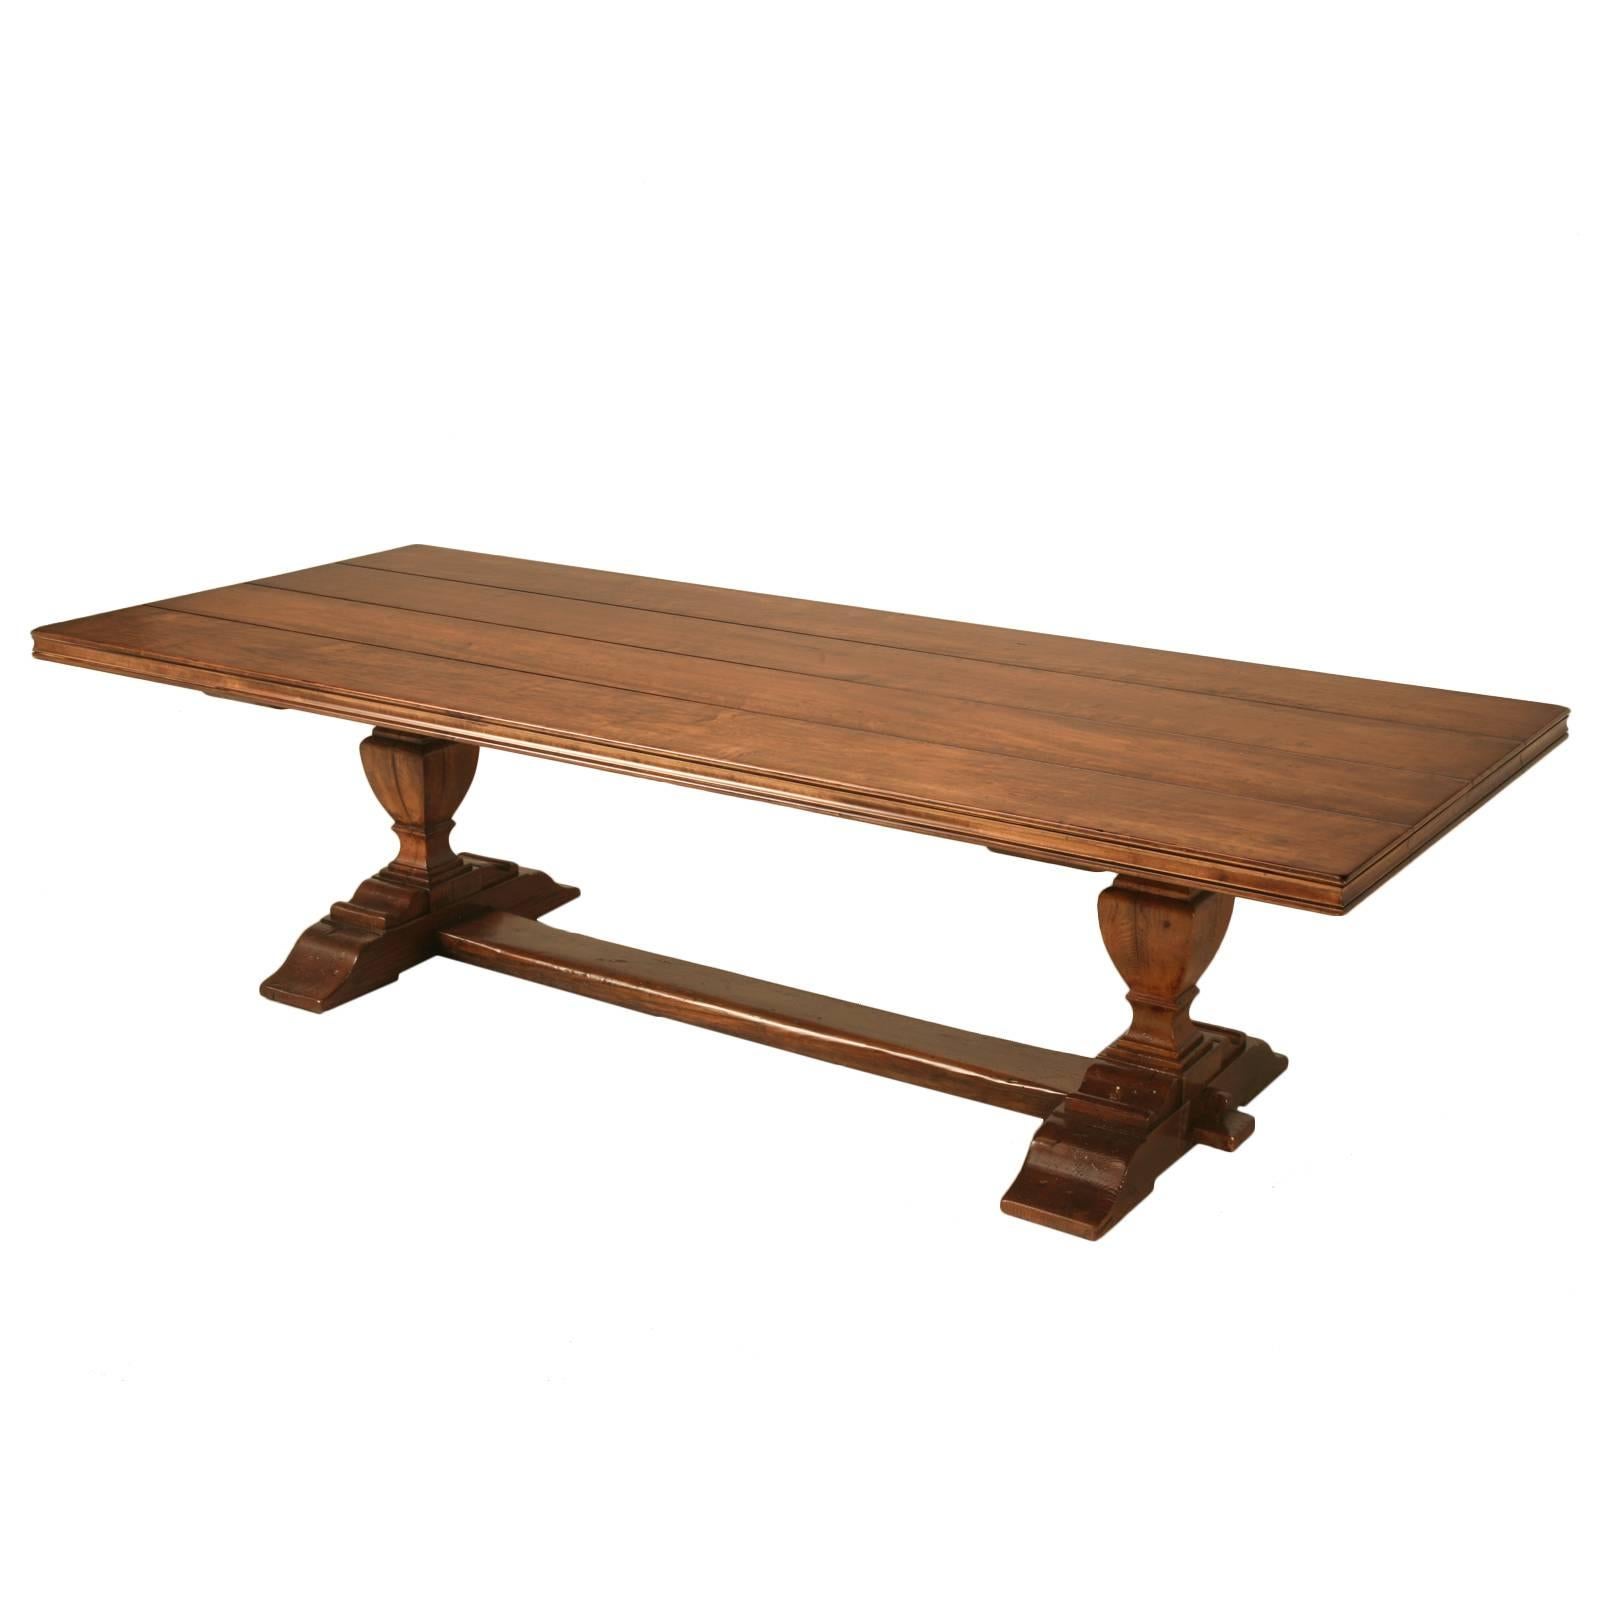 French Style Trestle Dining Table by Old Plank Available in Different Sizes For Sale